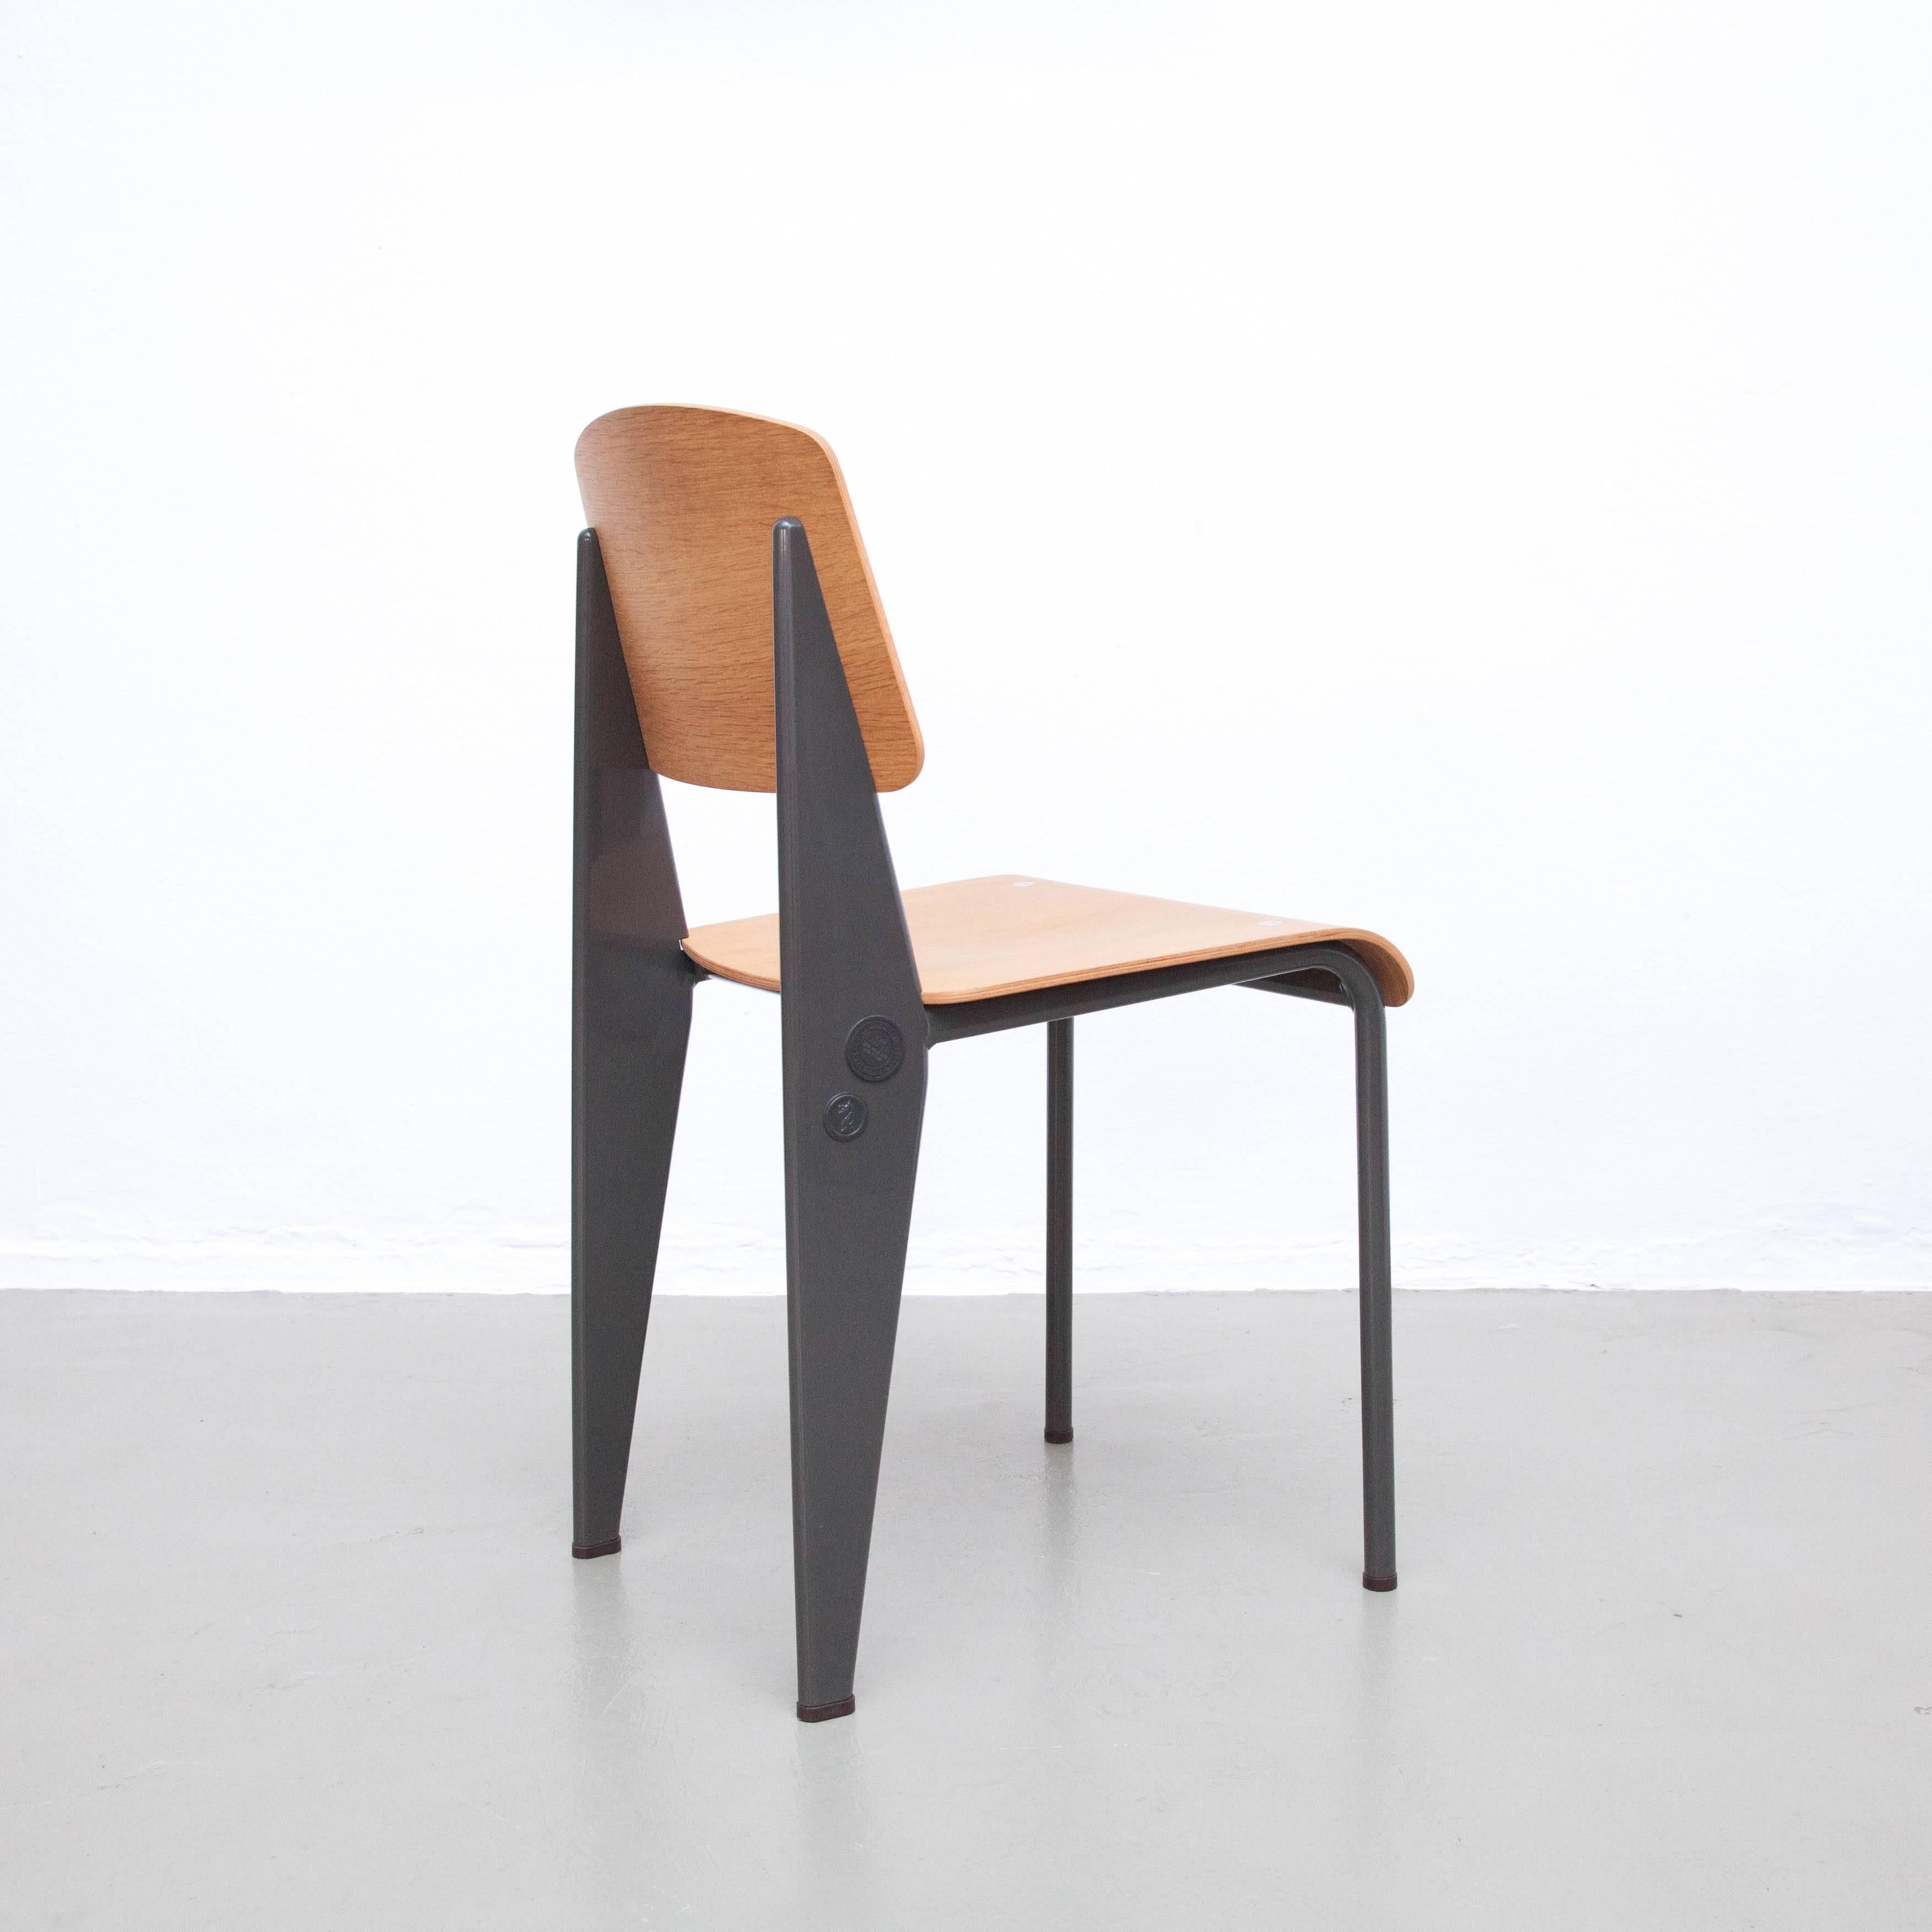 Jean Prouve Limited Edition Standard Chair by G-Star for Vitra im Zustand „Gut“ in Barcelona, Barcelona